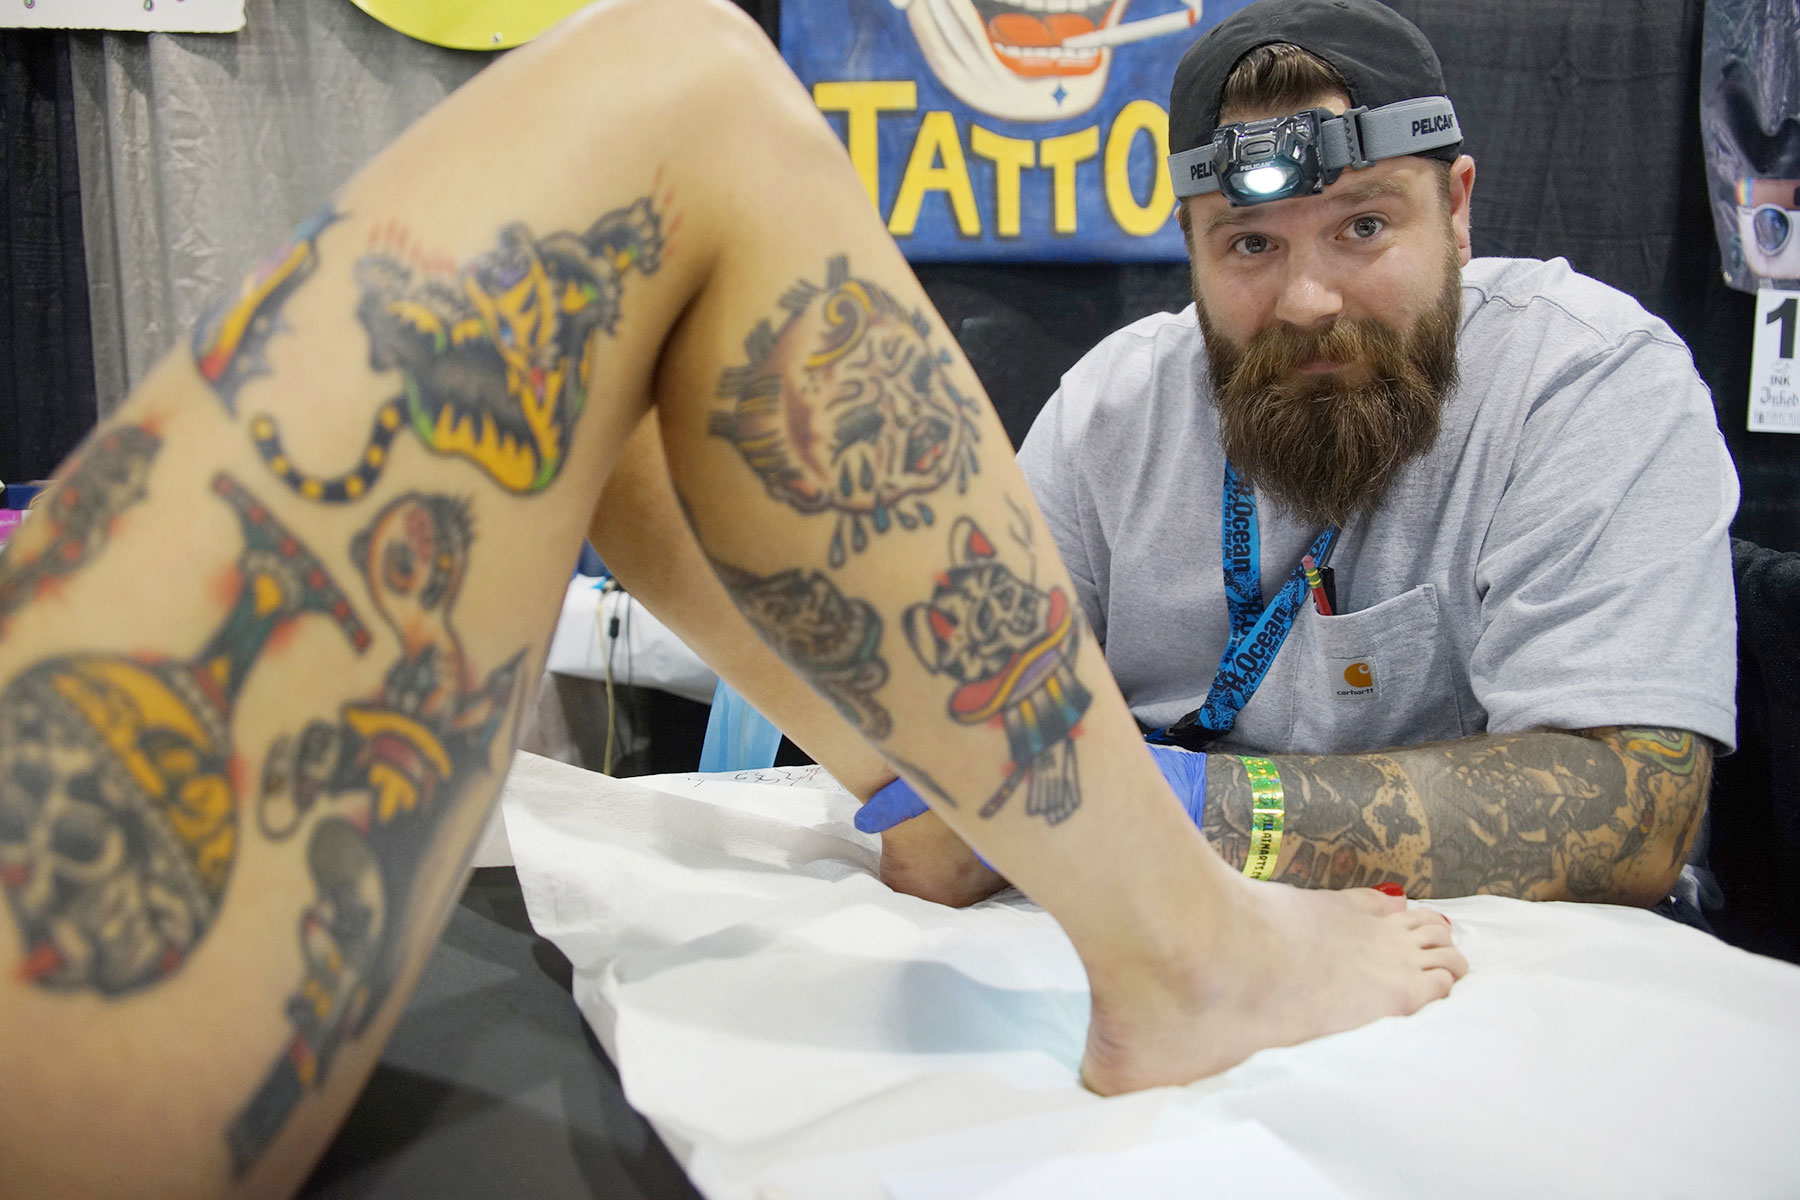 Tattoo convention draws inked bodies as living art The